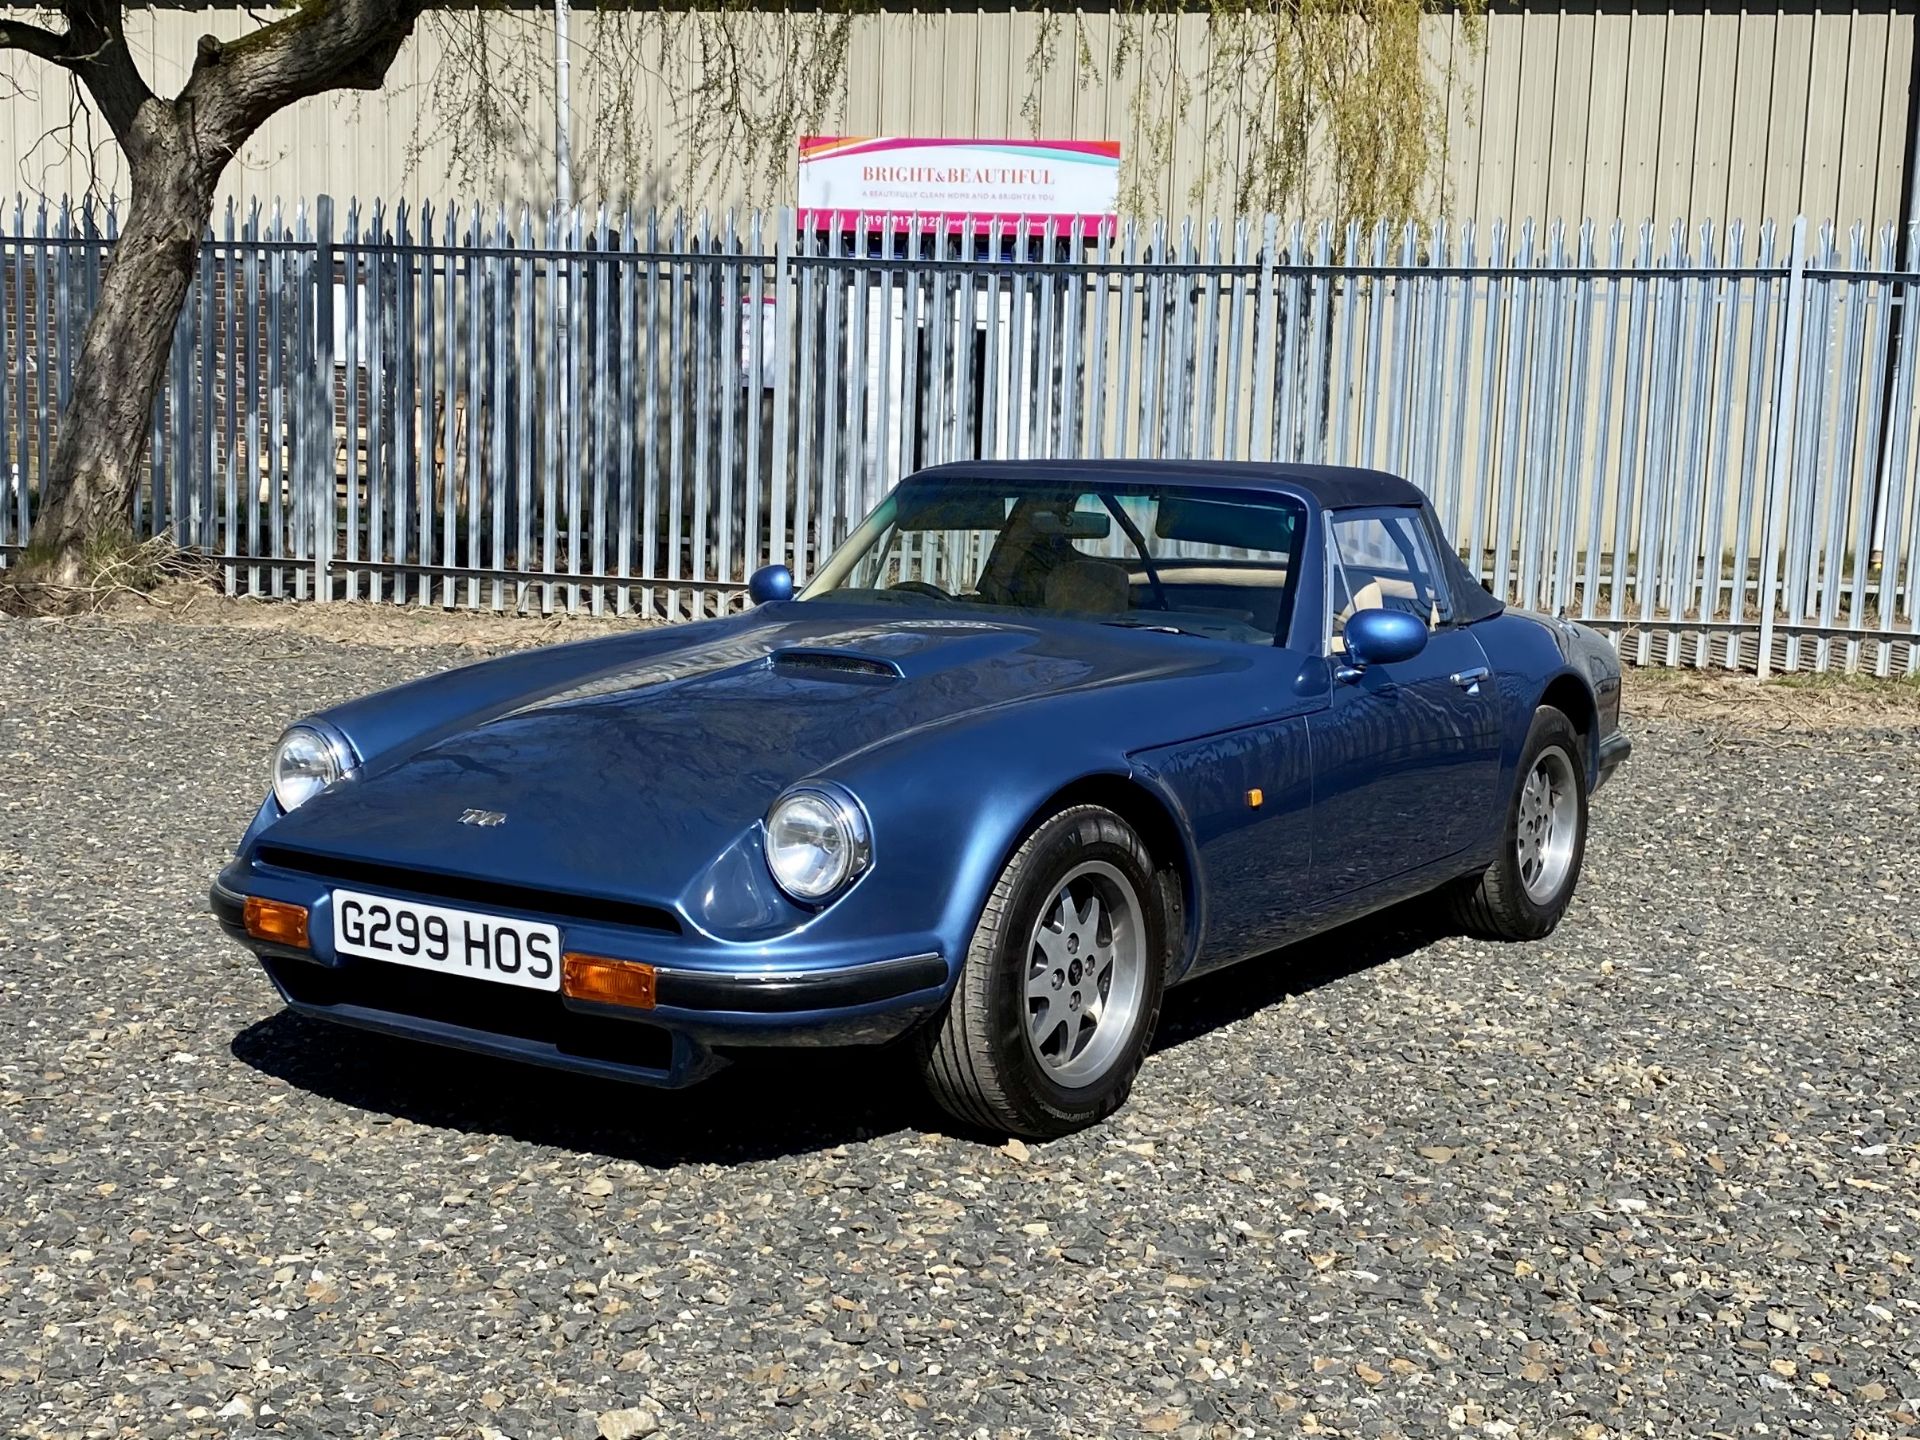 TVR S2 - Image 56 of 60